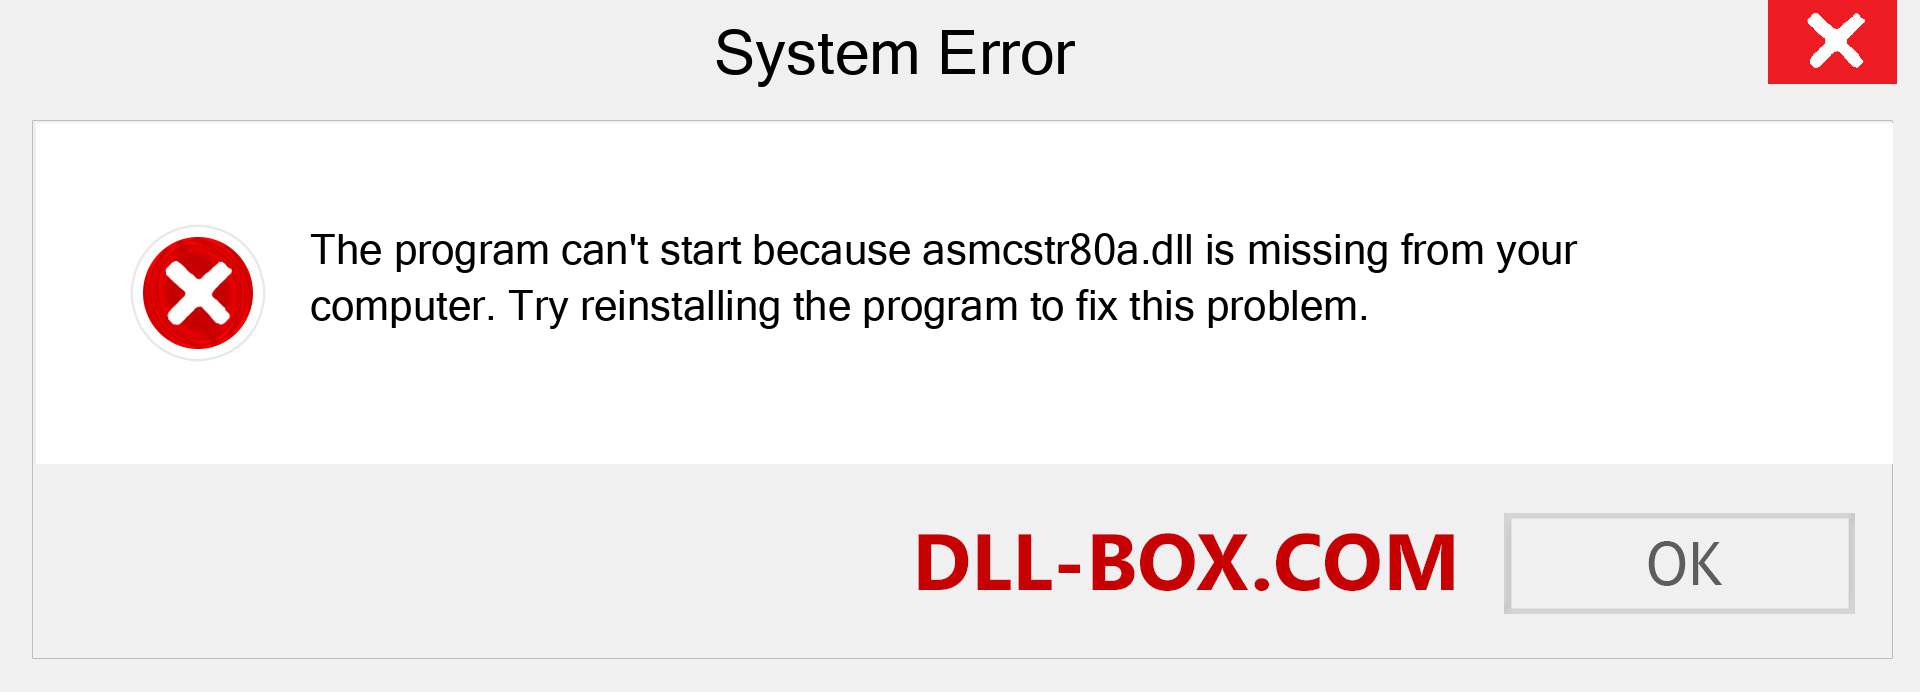  asmcstr80a.dll file is missing?. Download for Windows 7, 8, 10 - Fix  asmcstr80a dll Missing Error on Windows, photos, images